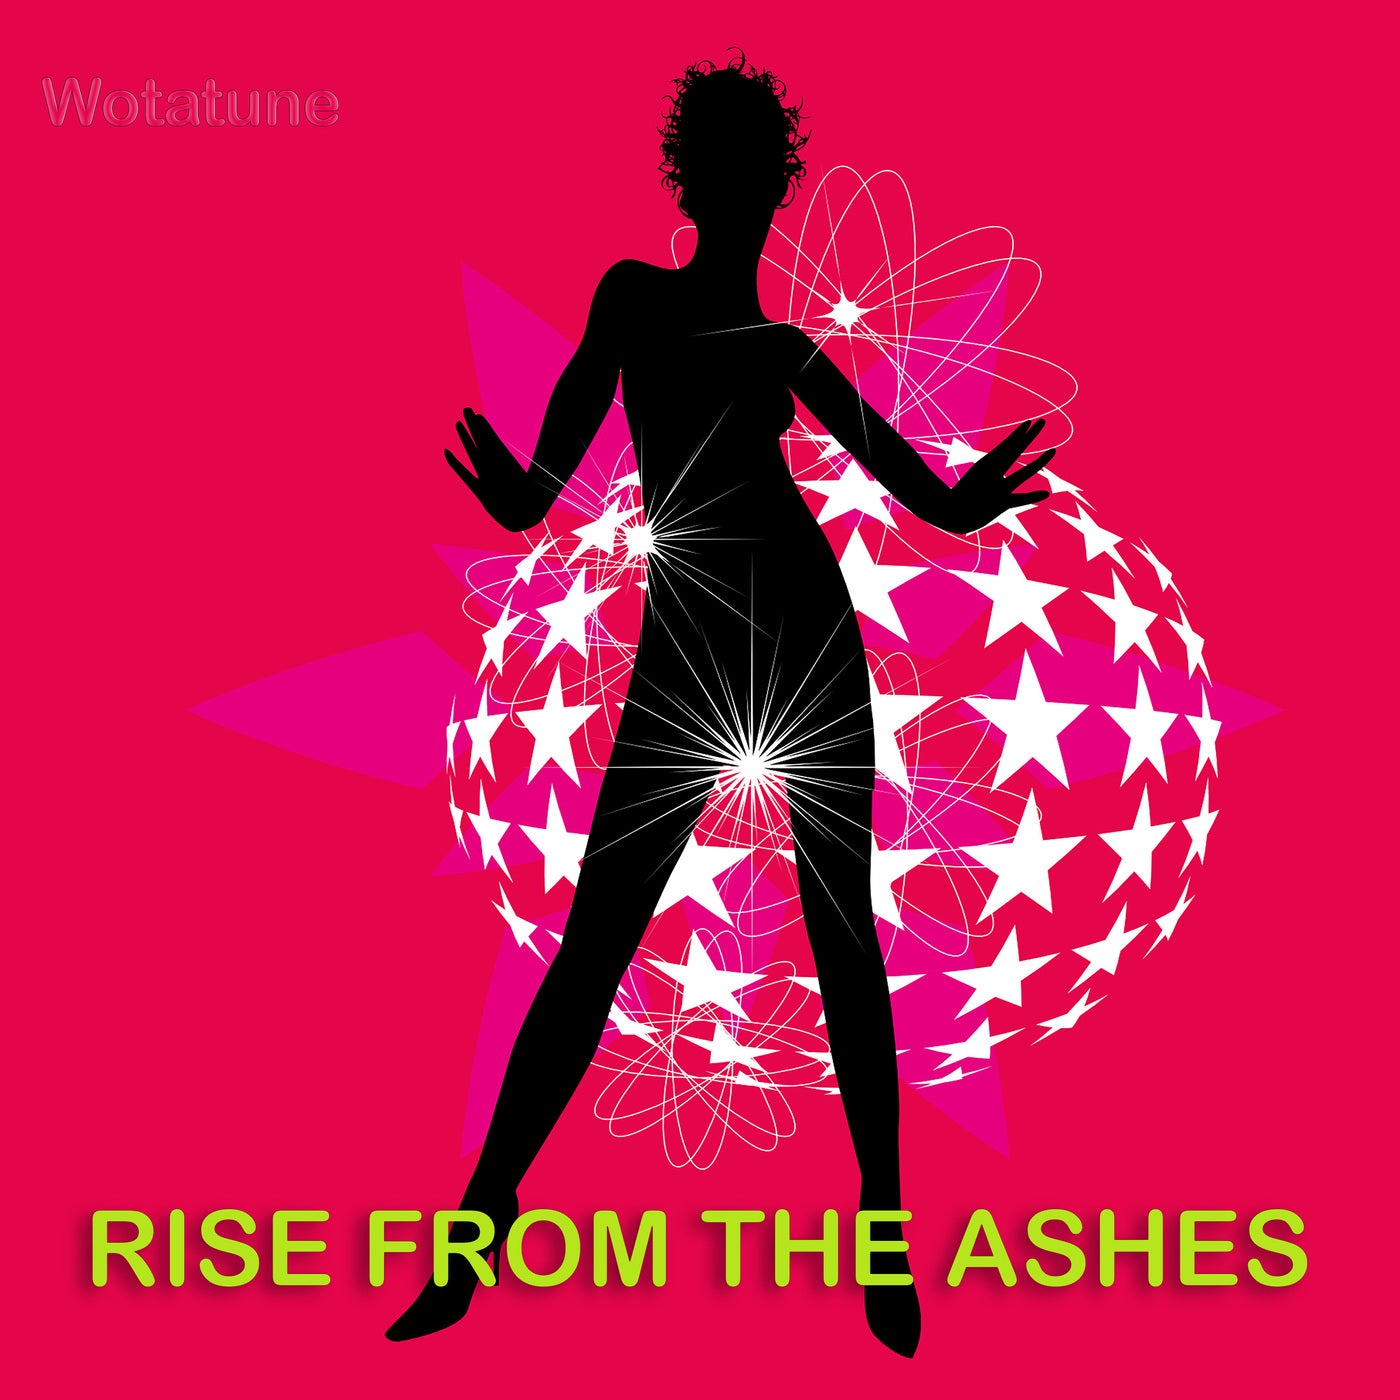 Rise from the Ashes (Radio-Edit)